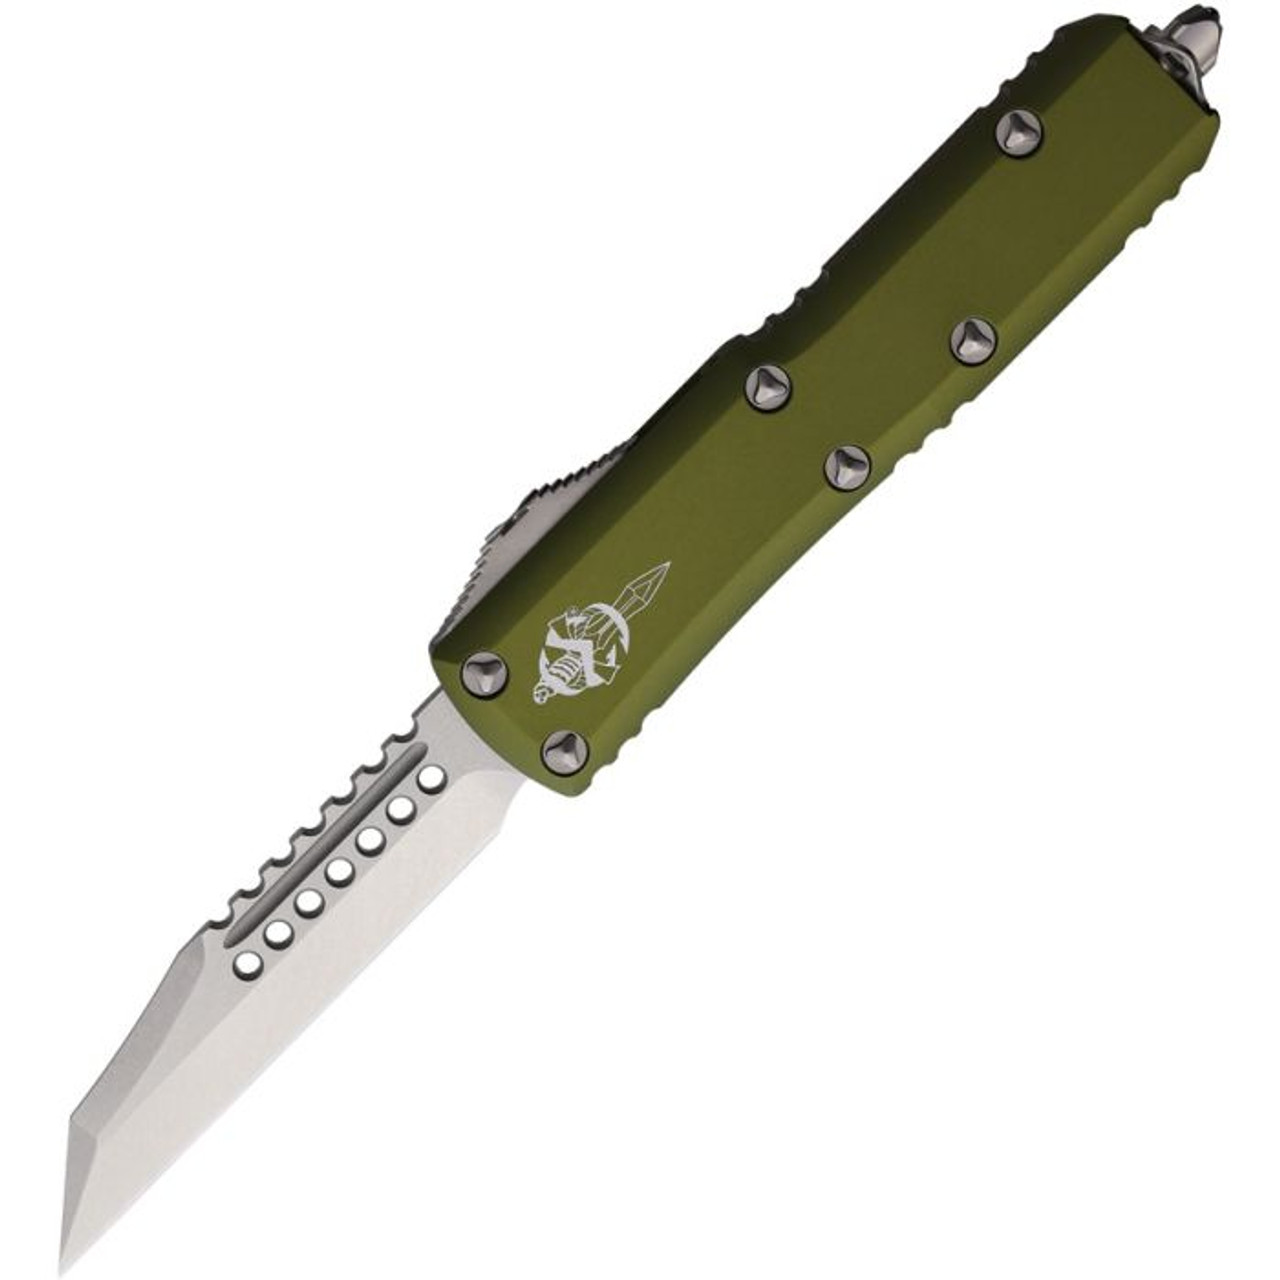 Microtech UTX-85 Warhound (MCT719W10ODS) 3.13" Premium Steel Stonewashed Wharncliffe Plain Blade, OD Green Anodized Aluminum Handle with Glass Breaker